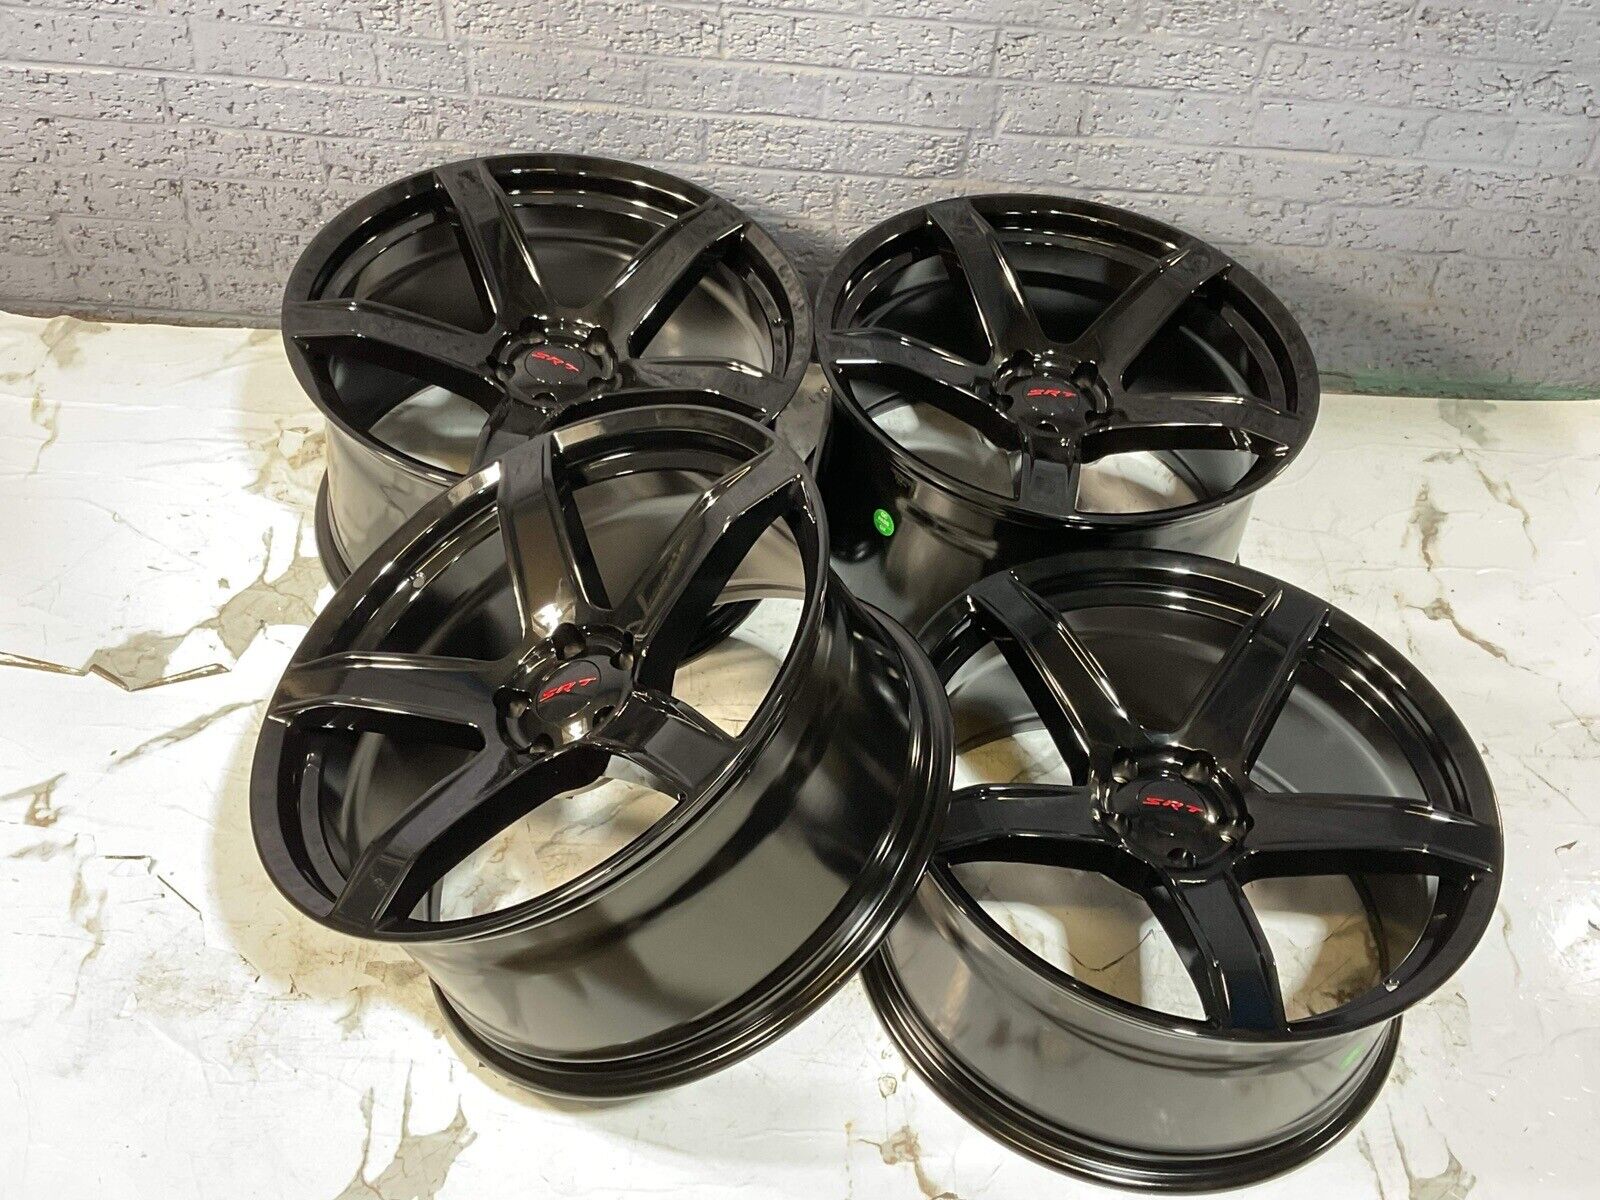 20x9.5 20x10.5 Dodge Wheels Gloss Black Fits Challenger Charger Hellcat set of 4